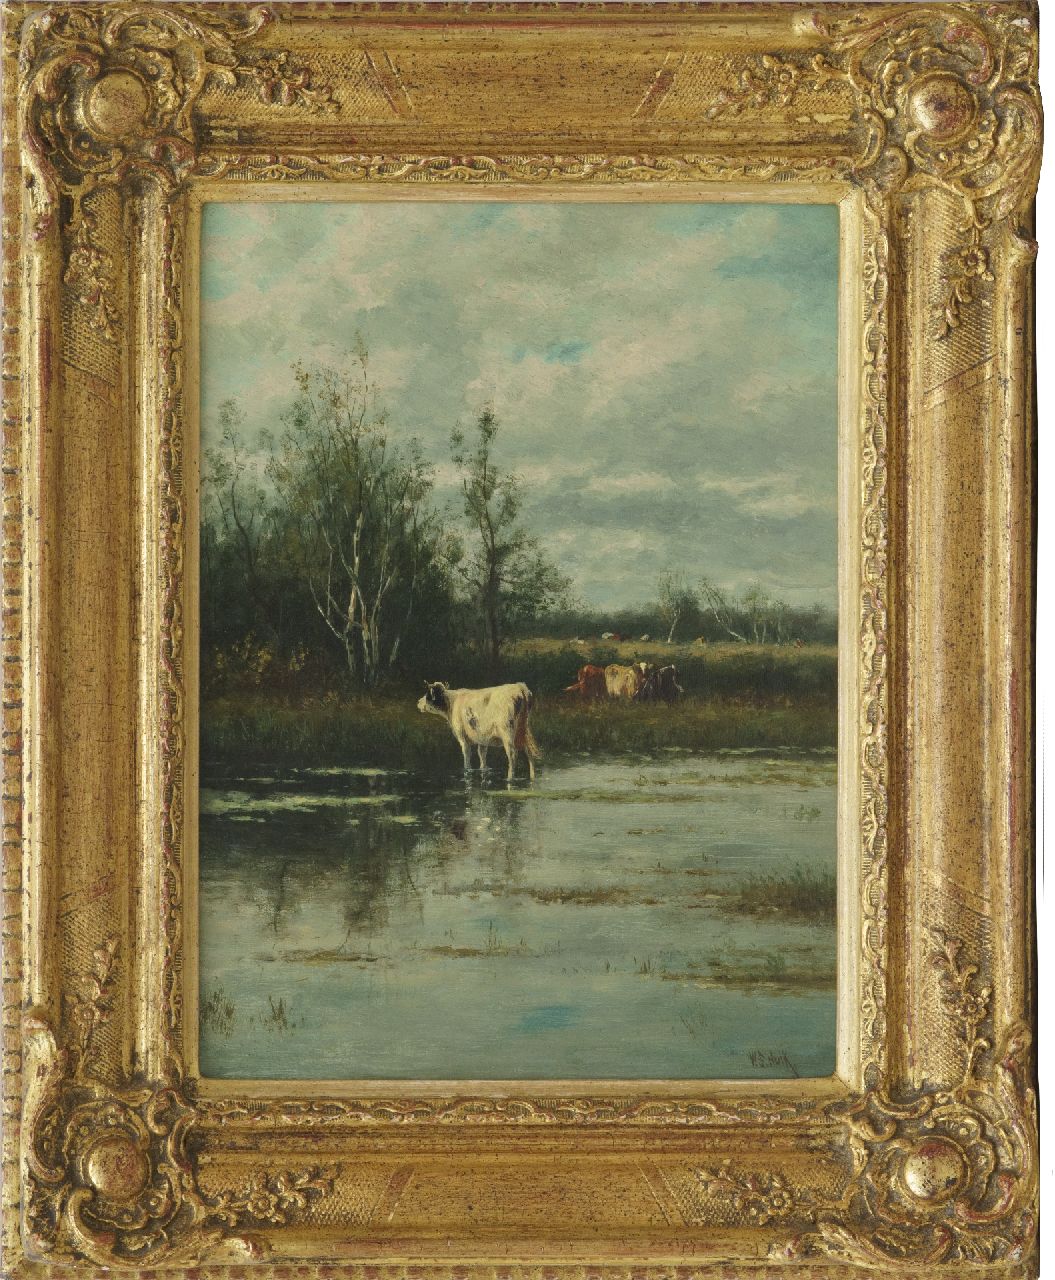 Hulk W.F.  | Willem Frederik Hulk, Cows along the water, oil on canvas 30.6 x 23.0 cm, signed l.r.